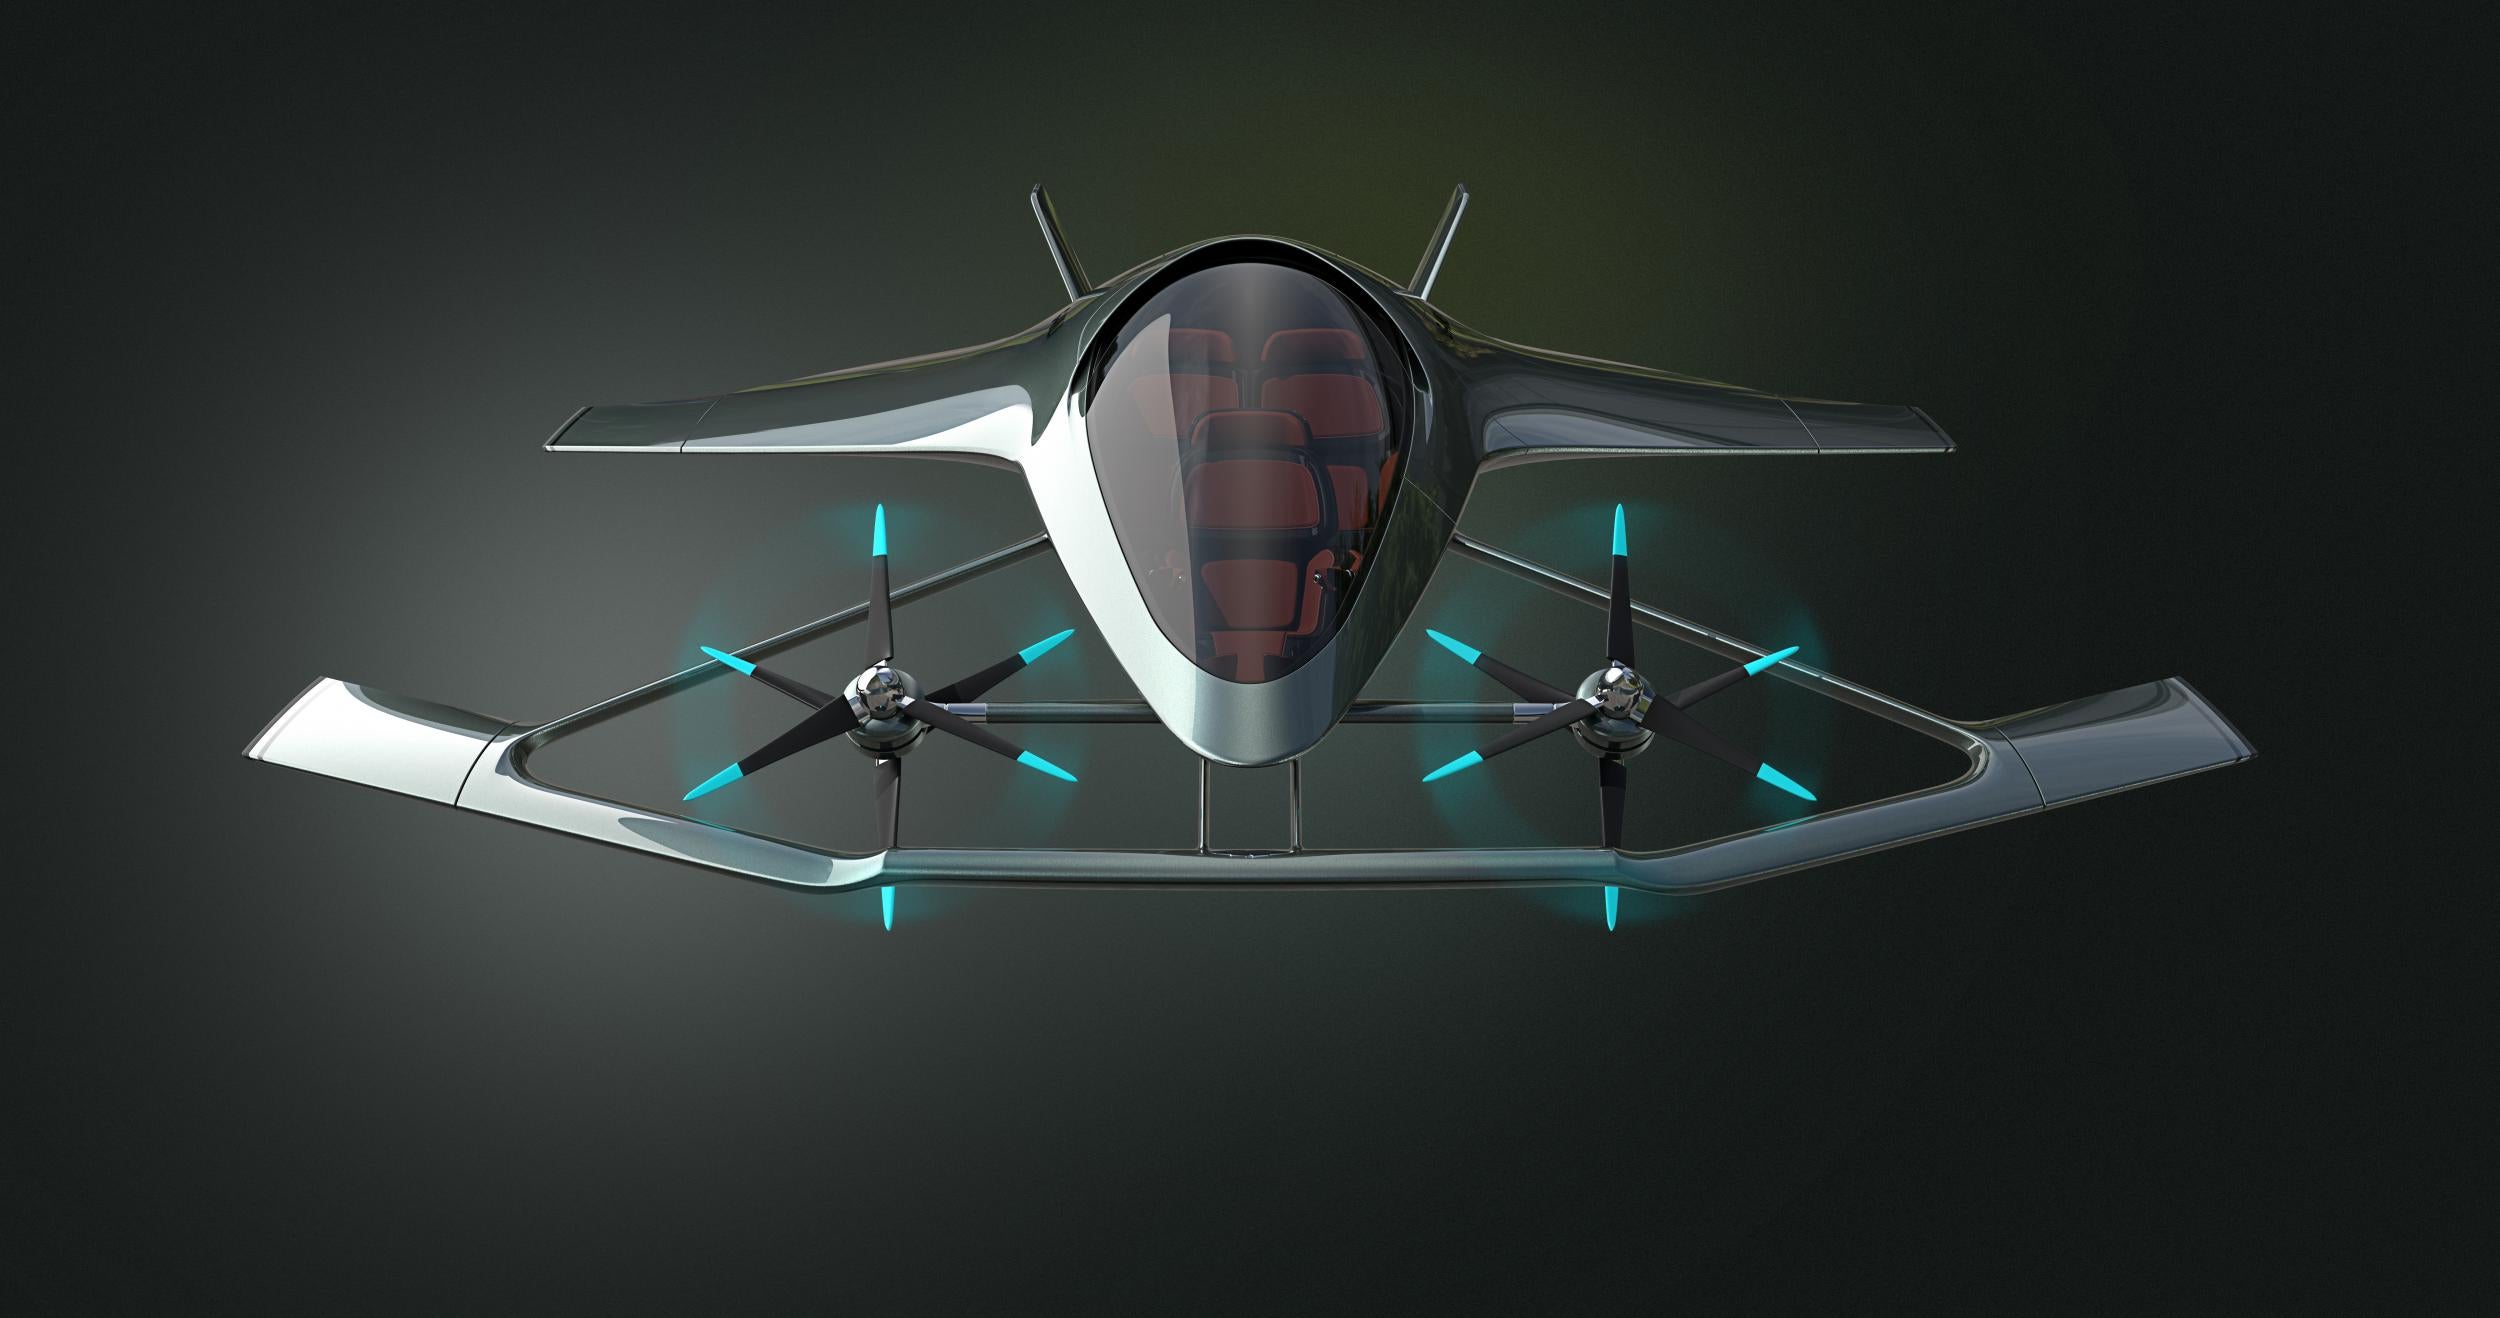 The Volante features vertical take-off and landing (VTOL) capabilities